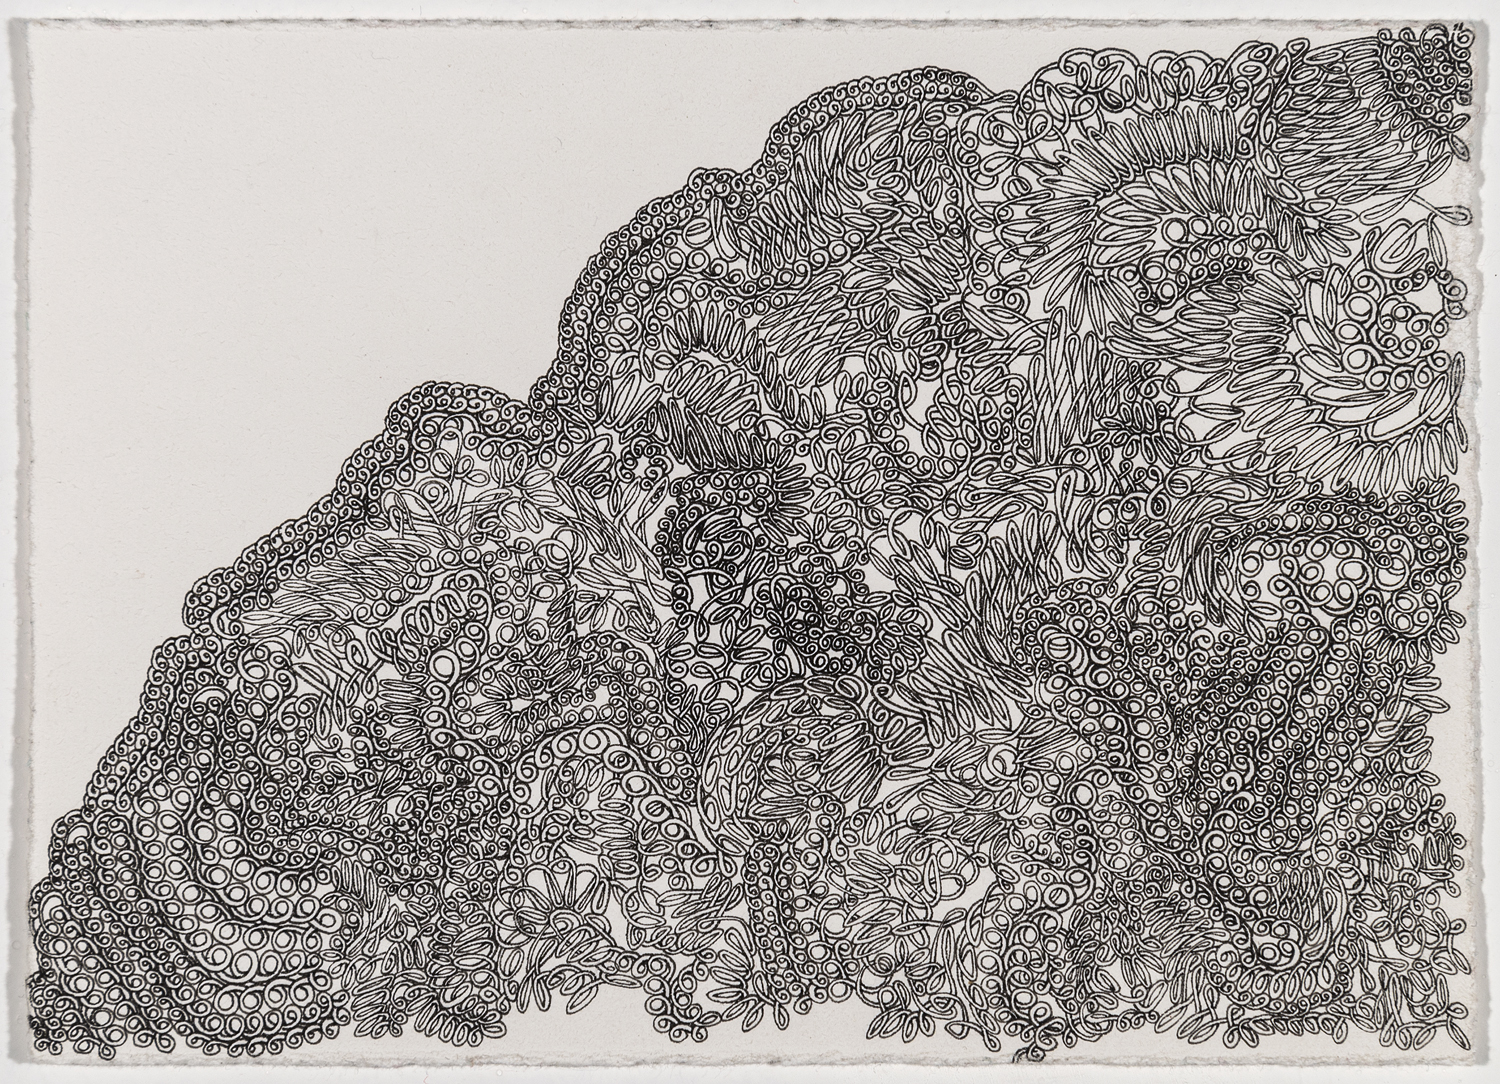 Sincerity Graph, ink on paper, 4.5 x 6 inches, 2015